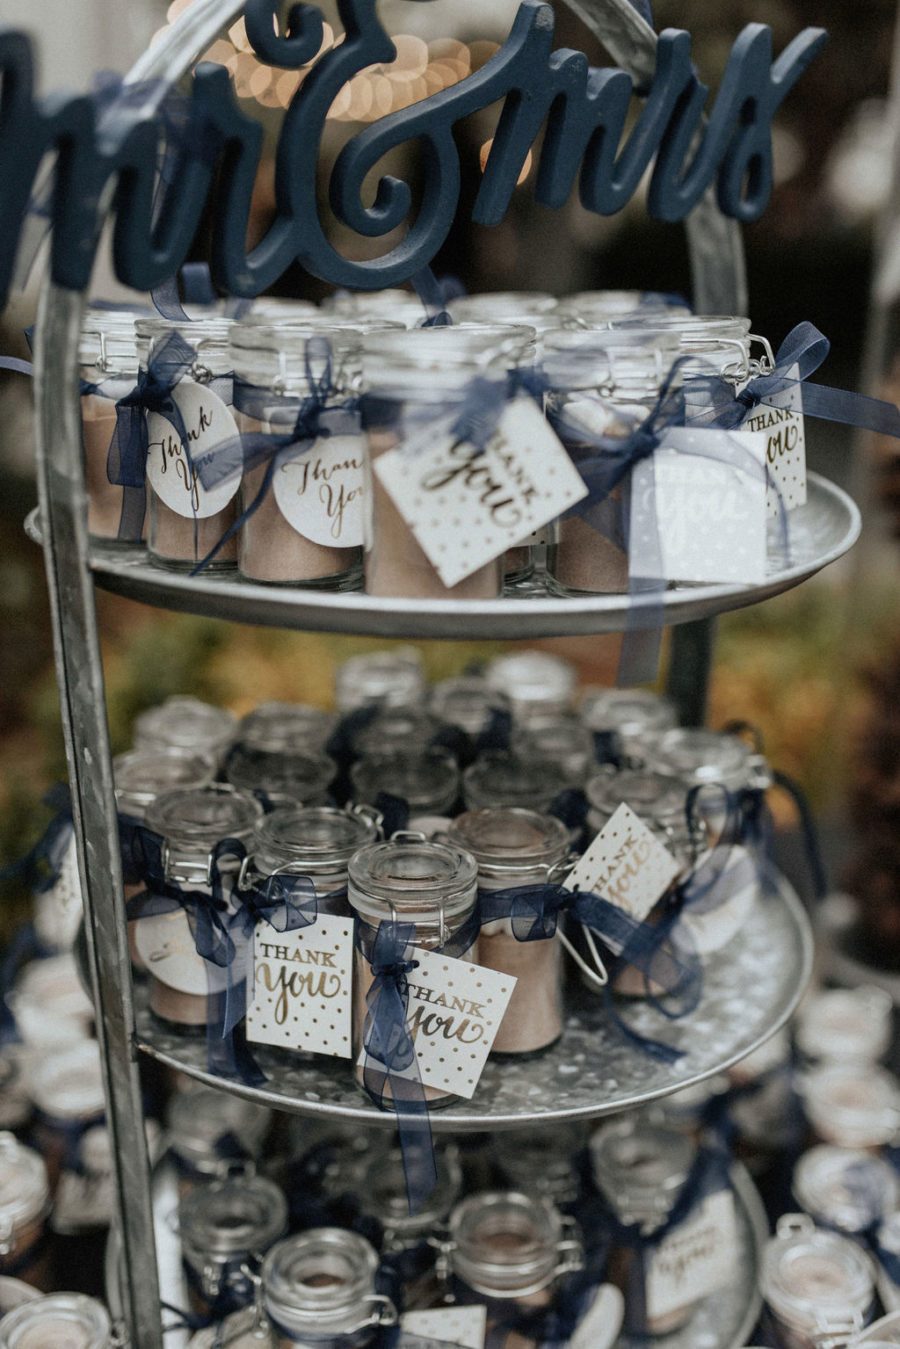 Hot chocolate wedding favors: Magical Winter Wedding by Meghan Melia Photography featured on Nashville Bride Guide!